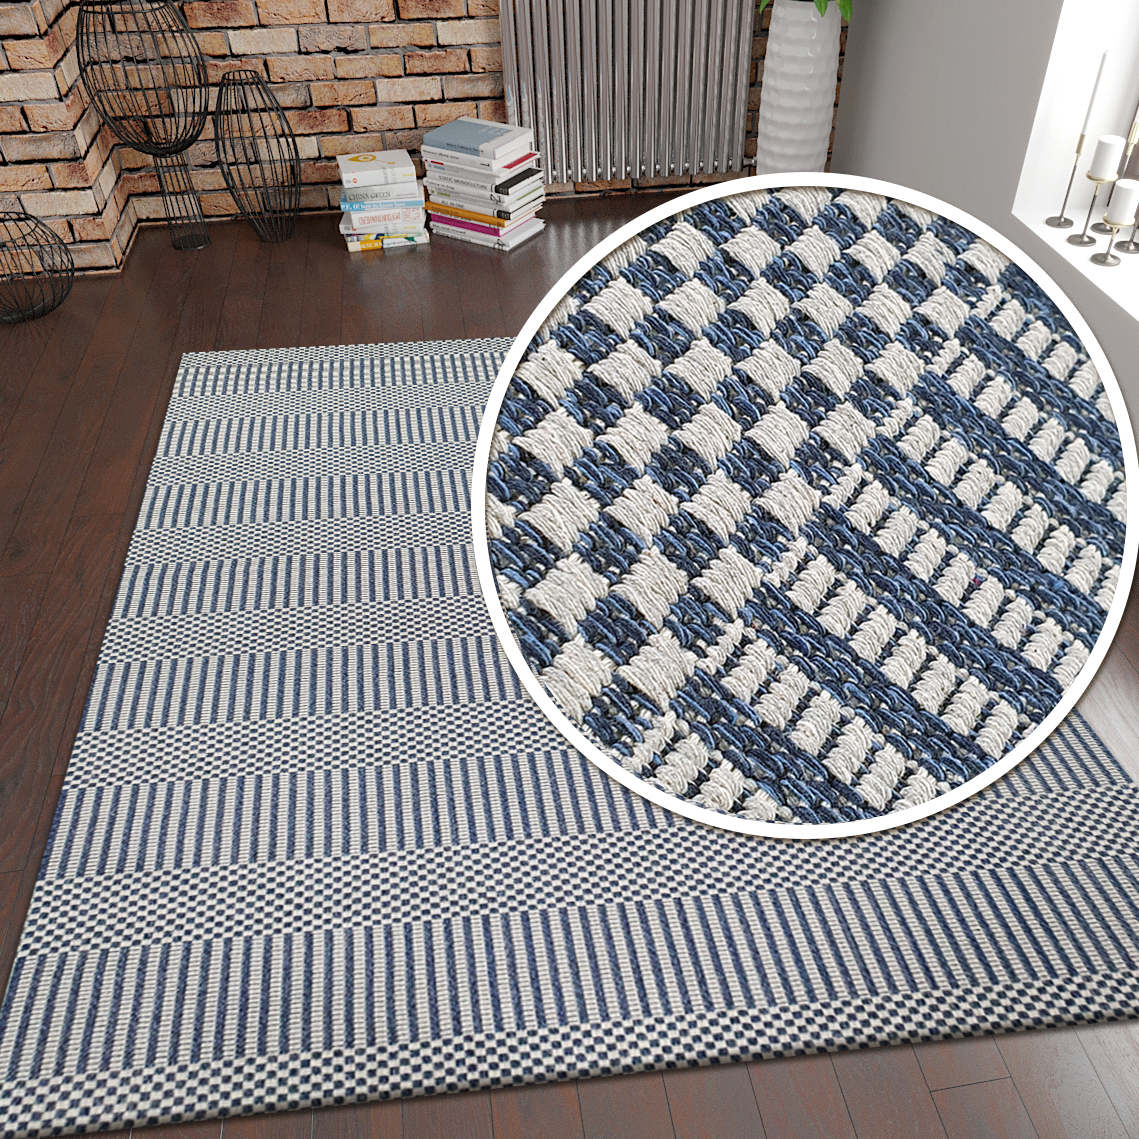 Cotton Rug Navy Blue Grey Braided Striped | Rugs Dropshipping ...